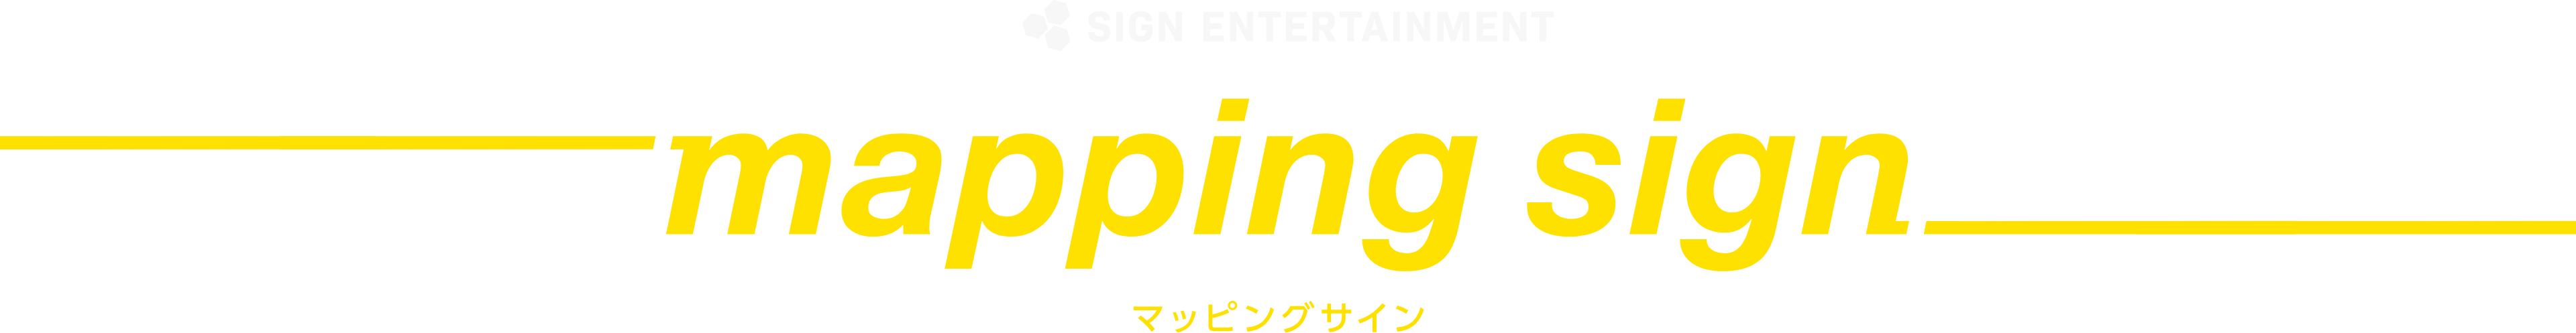 SIGN ENTERTAINMENT mapping sign マッピングサイン